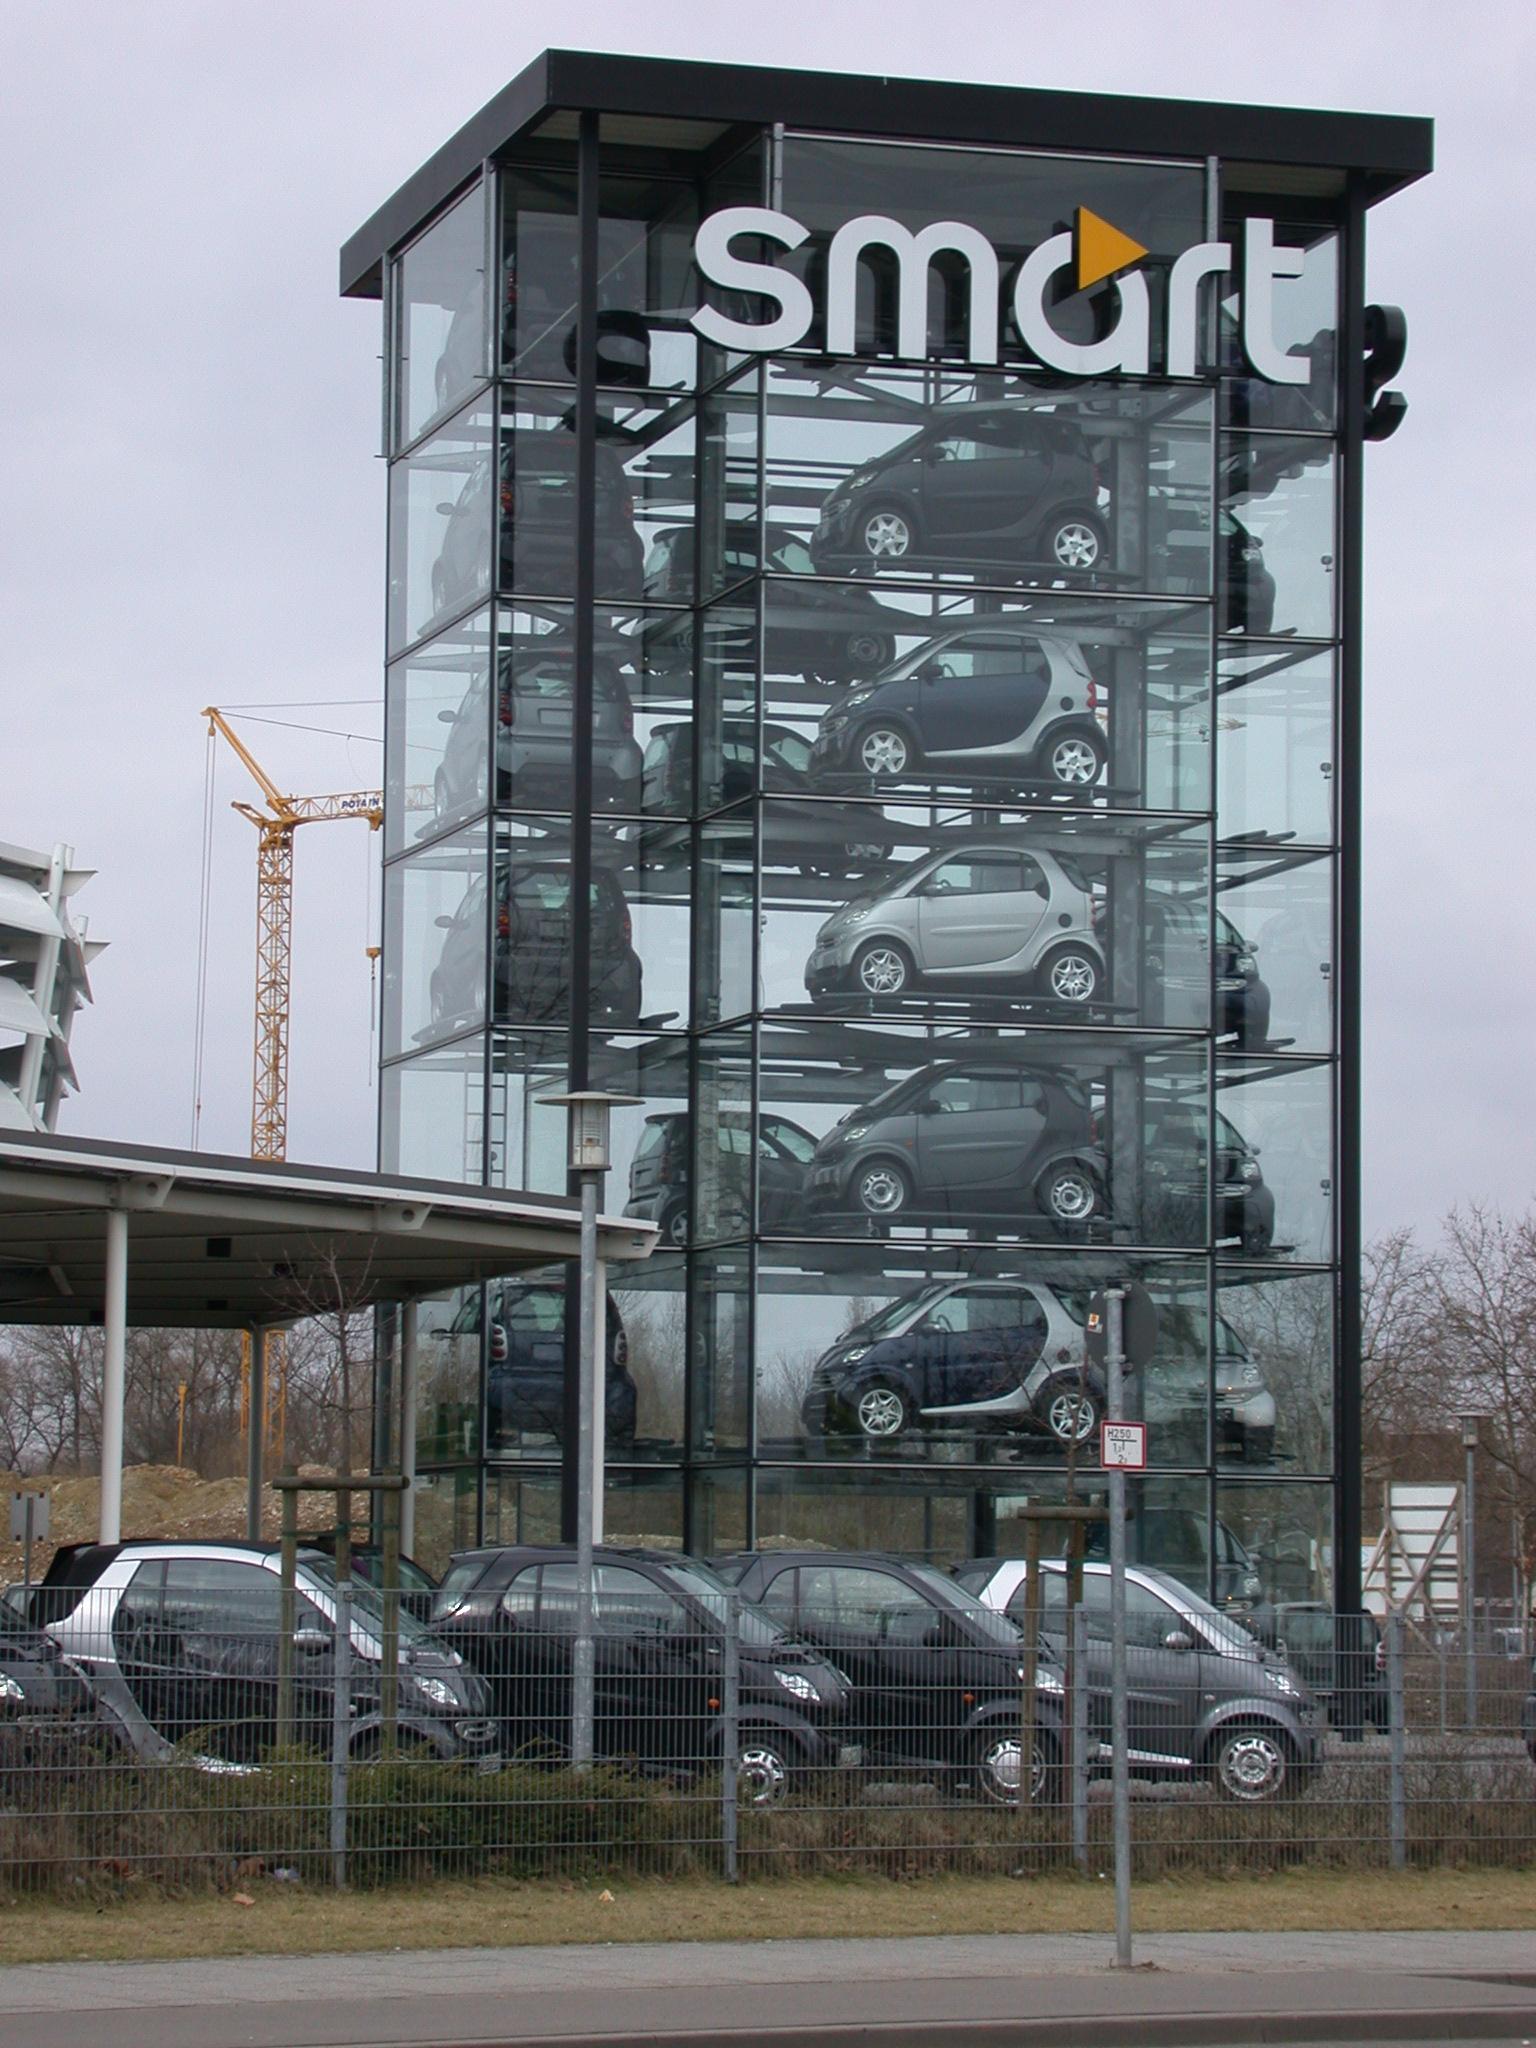 Smart Car tower. Not so smart really